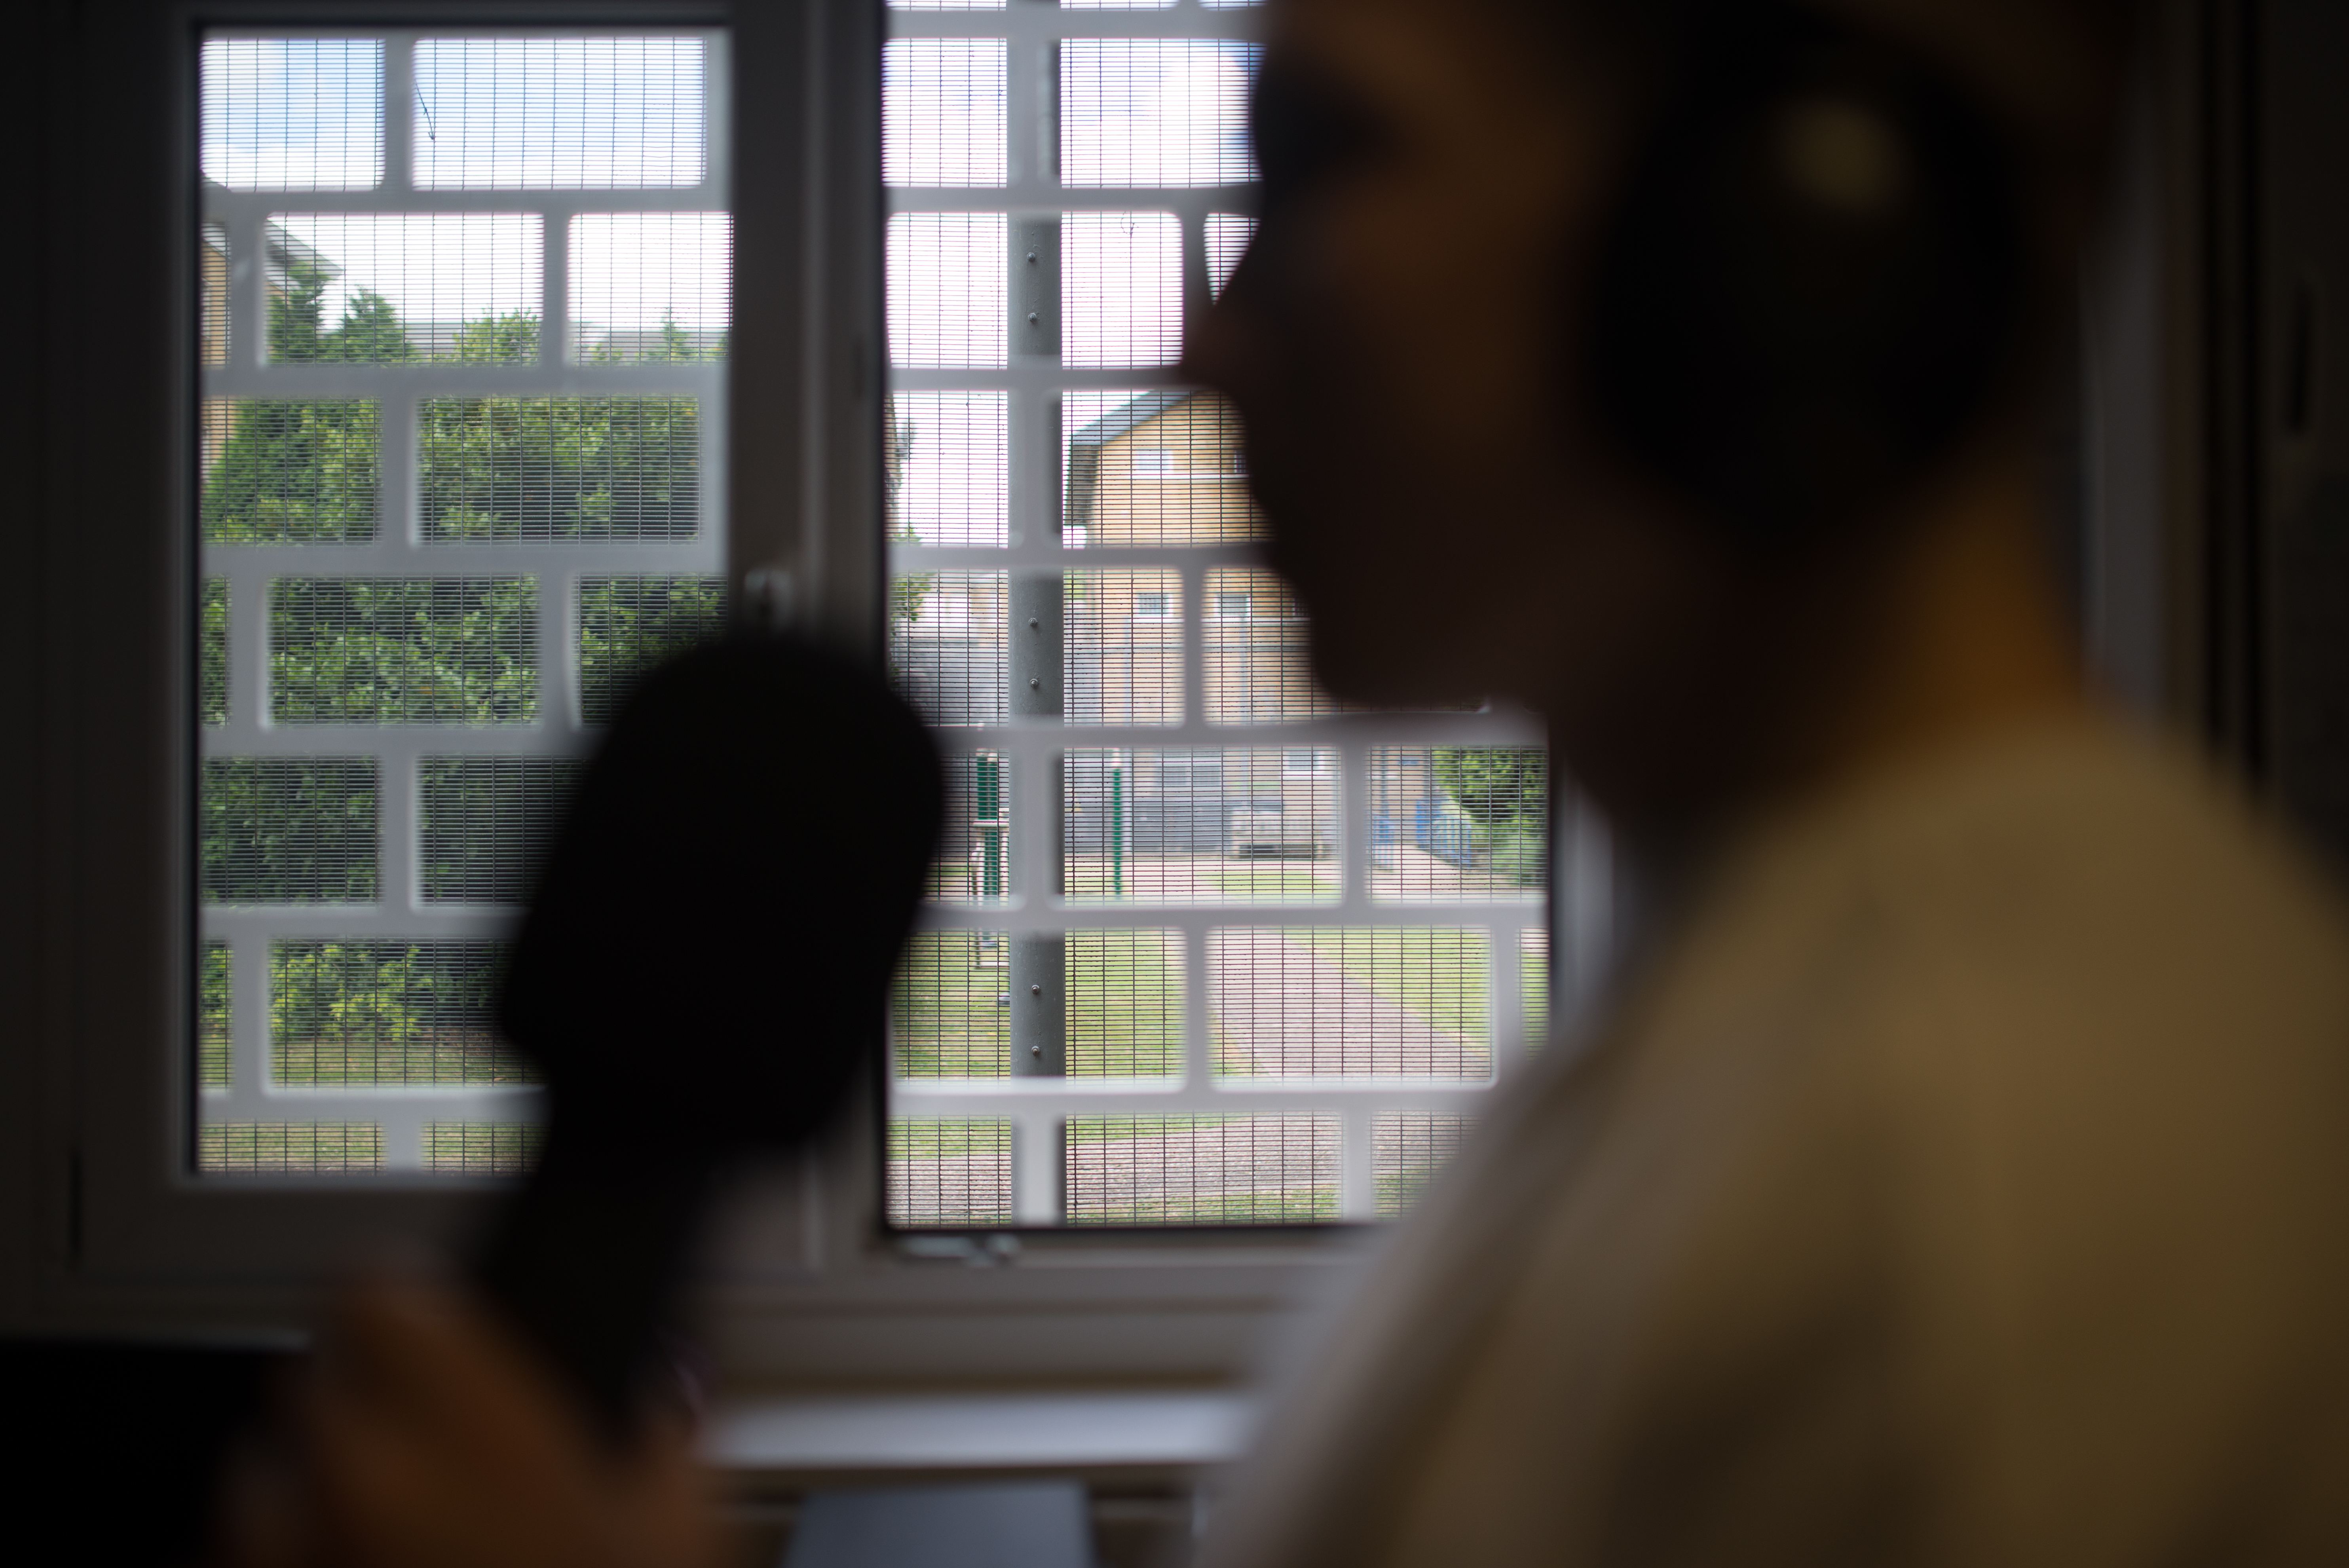 A photo of a prisoner broadcasting on the prison radio